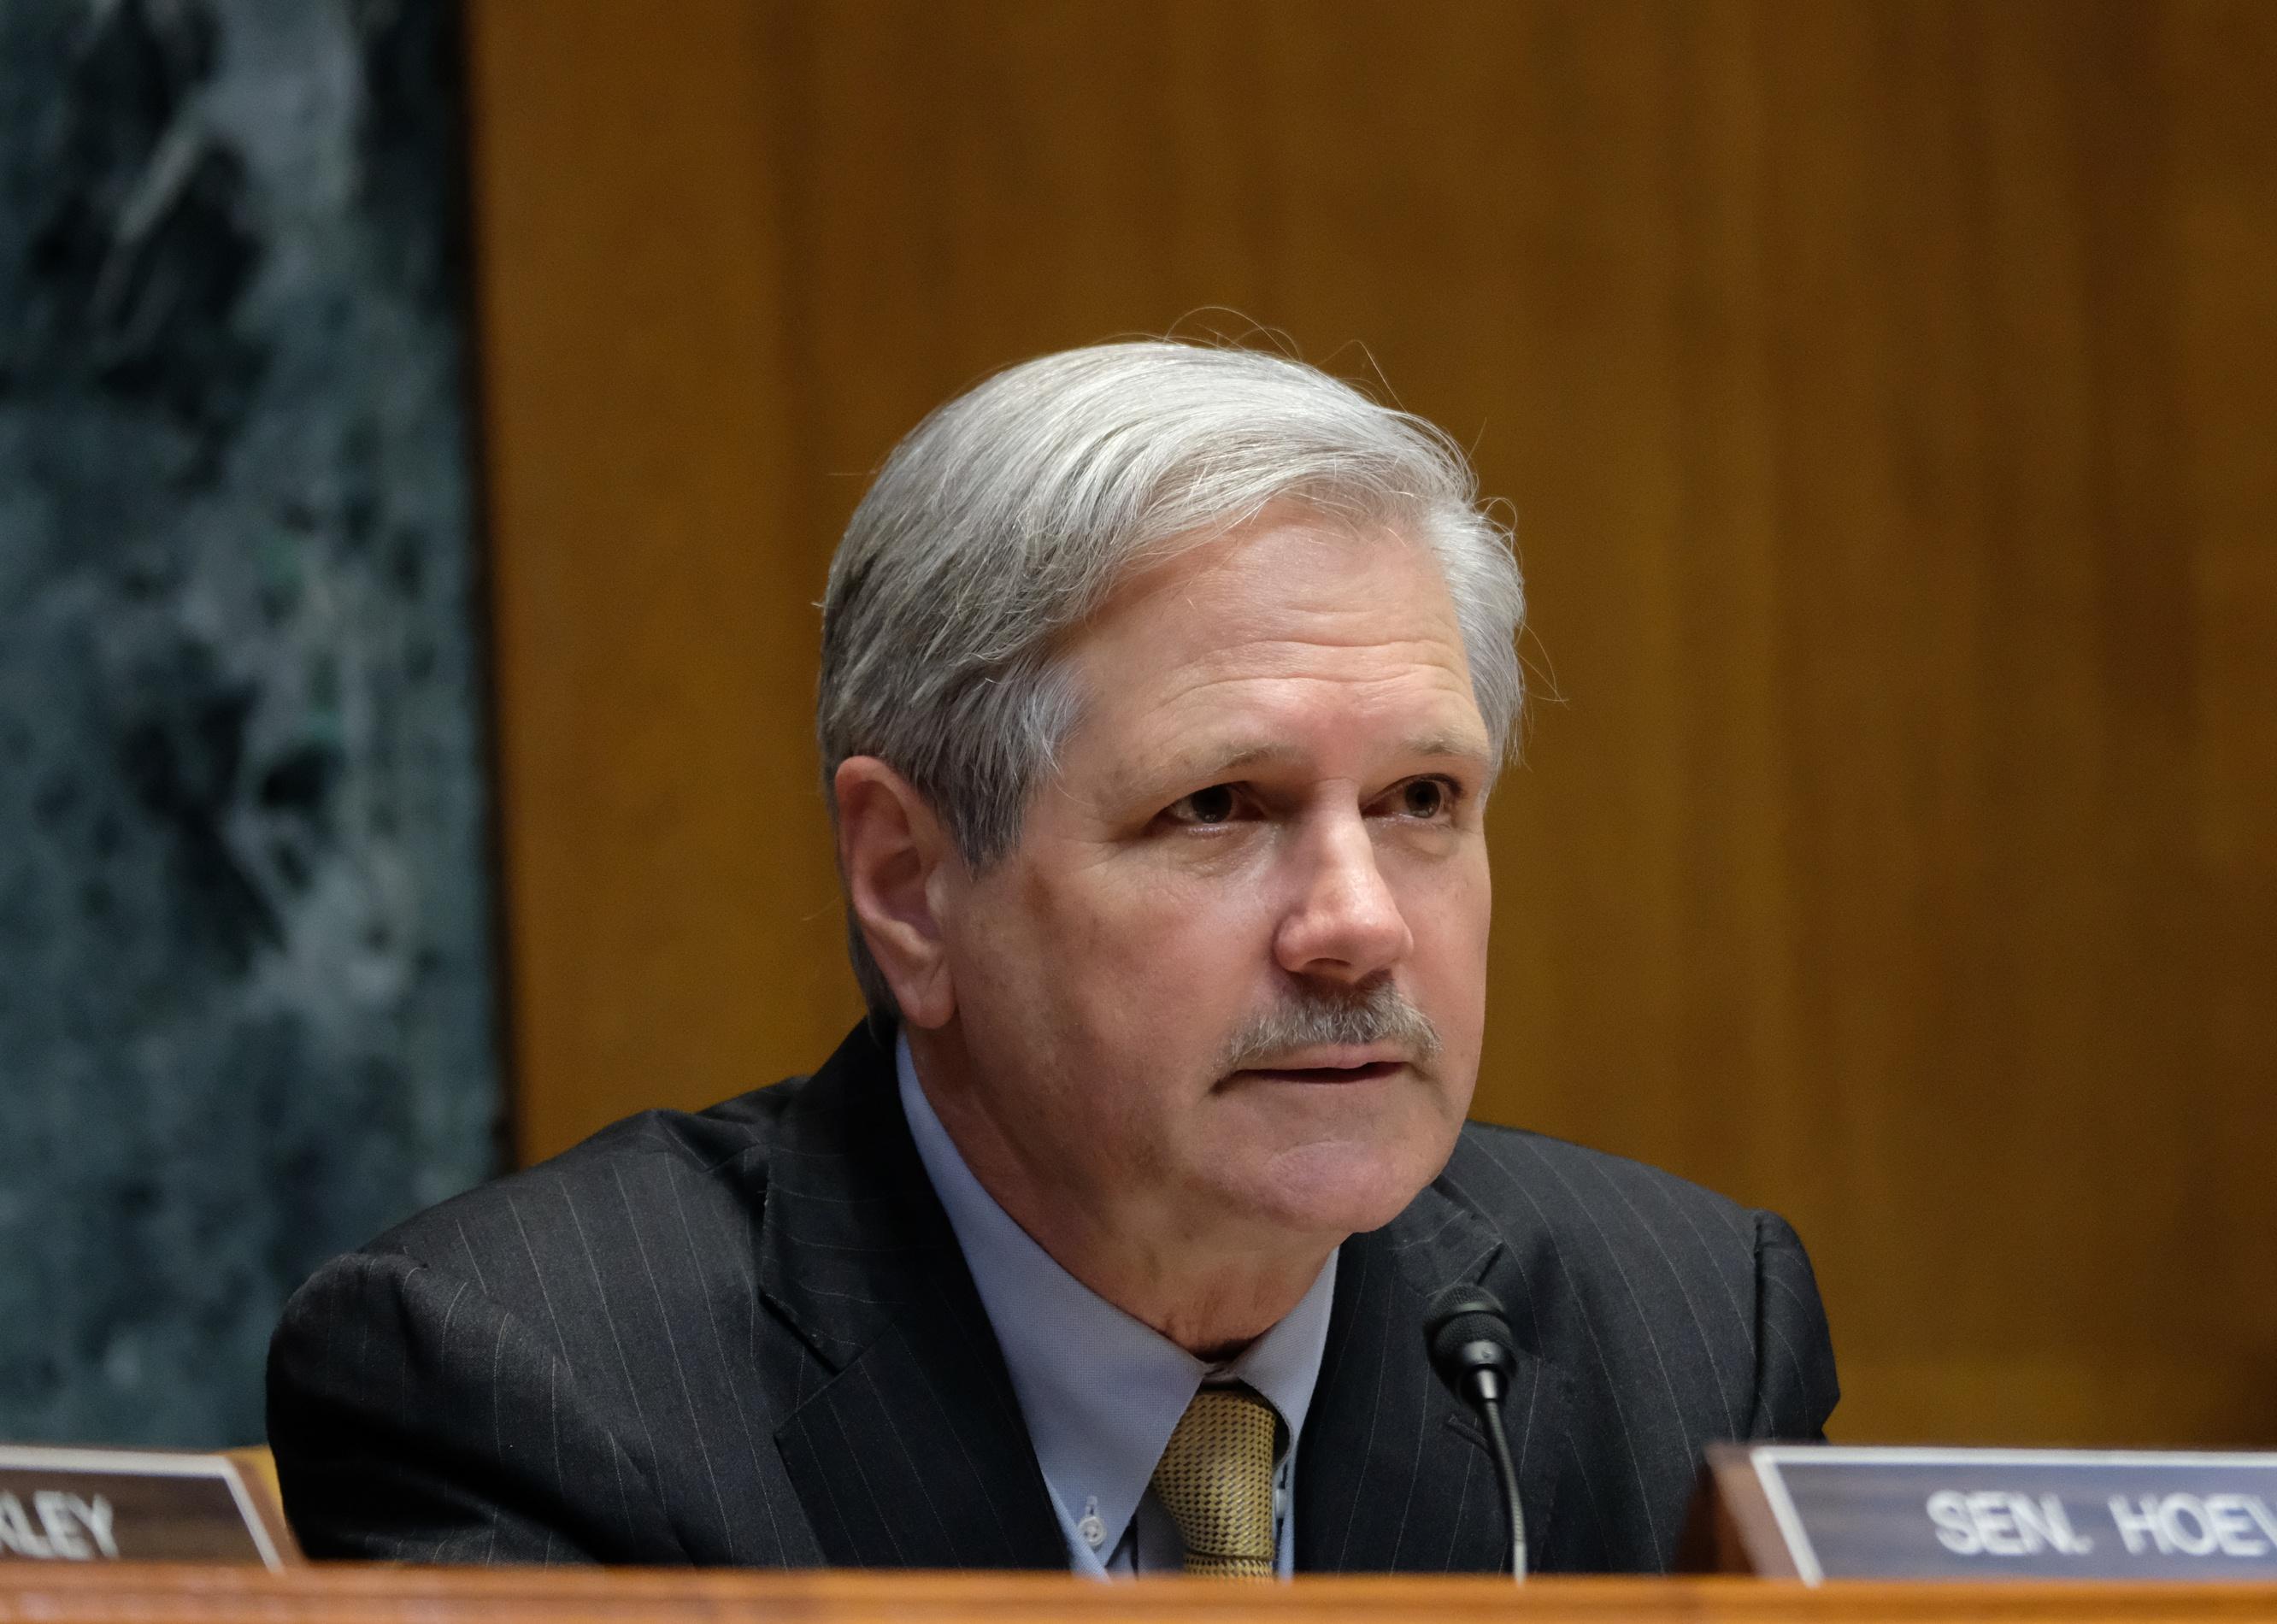 John Hoeven seated in front of his name plate in a suit.